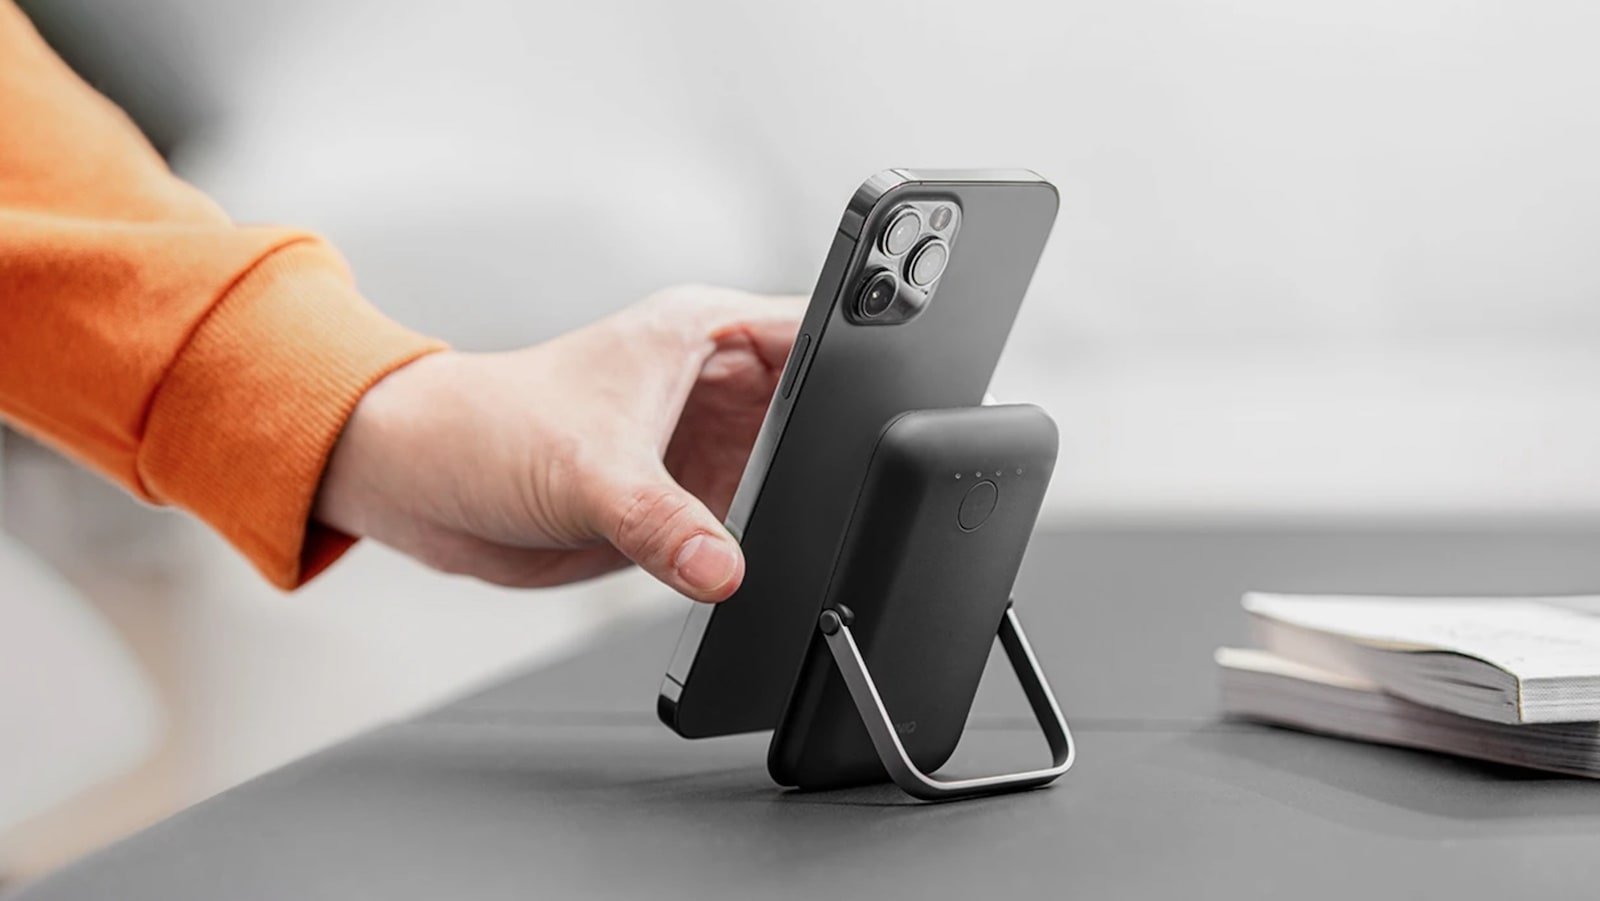 UNIQ Hoveo wireless power bank with a stand fits in your pocket & has a 5,000 mAh battery